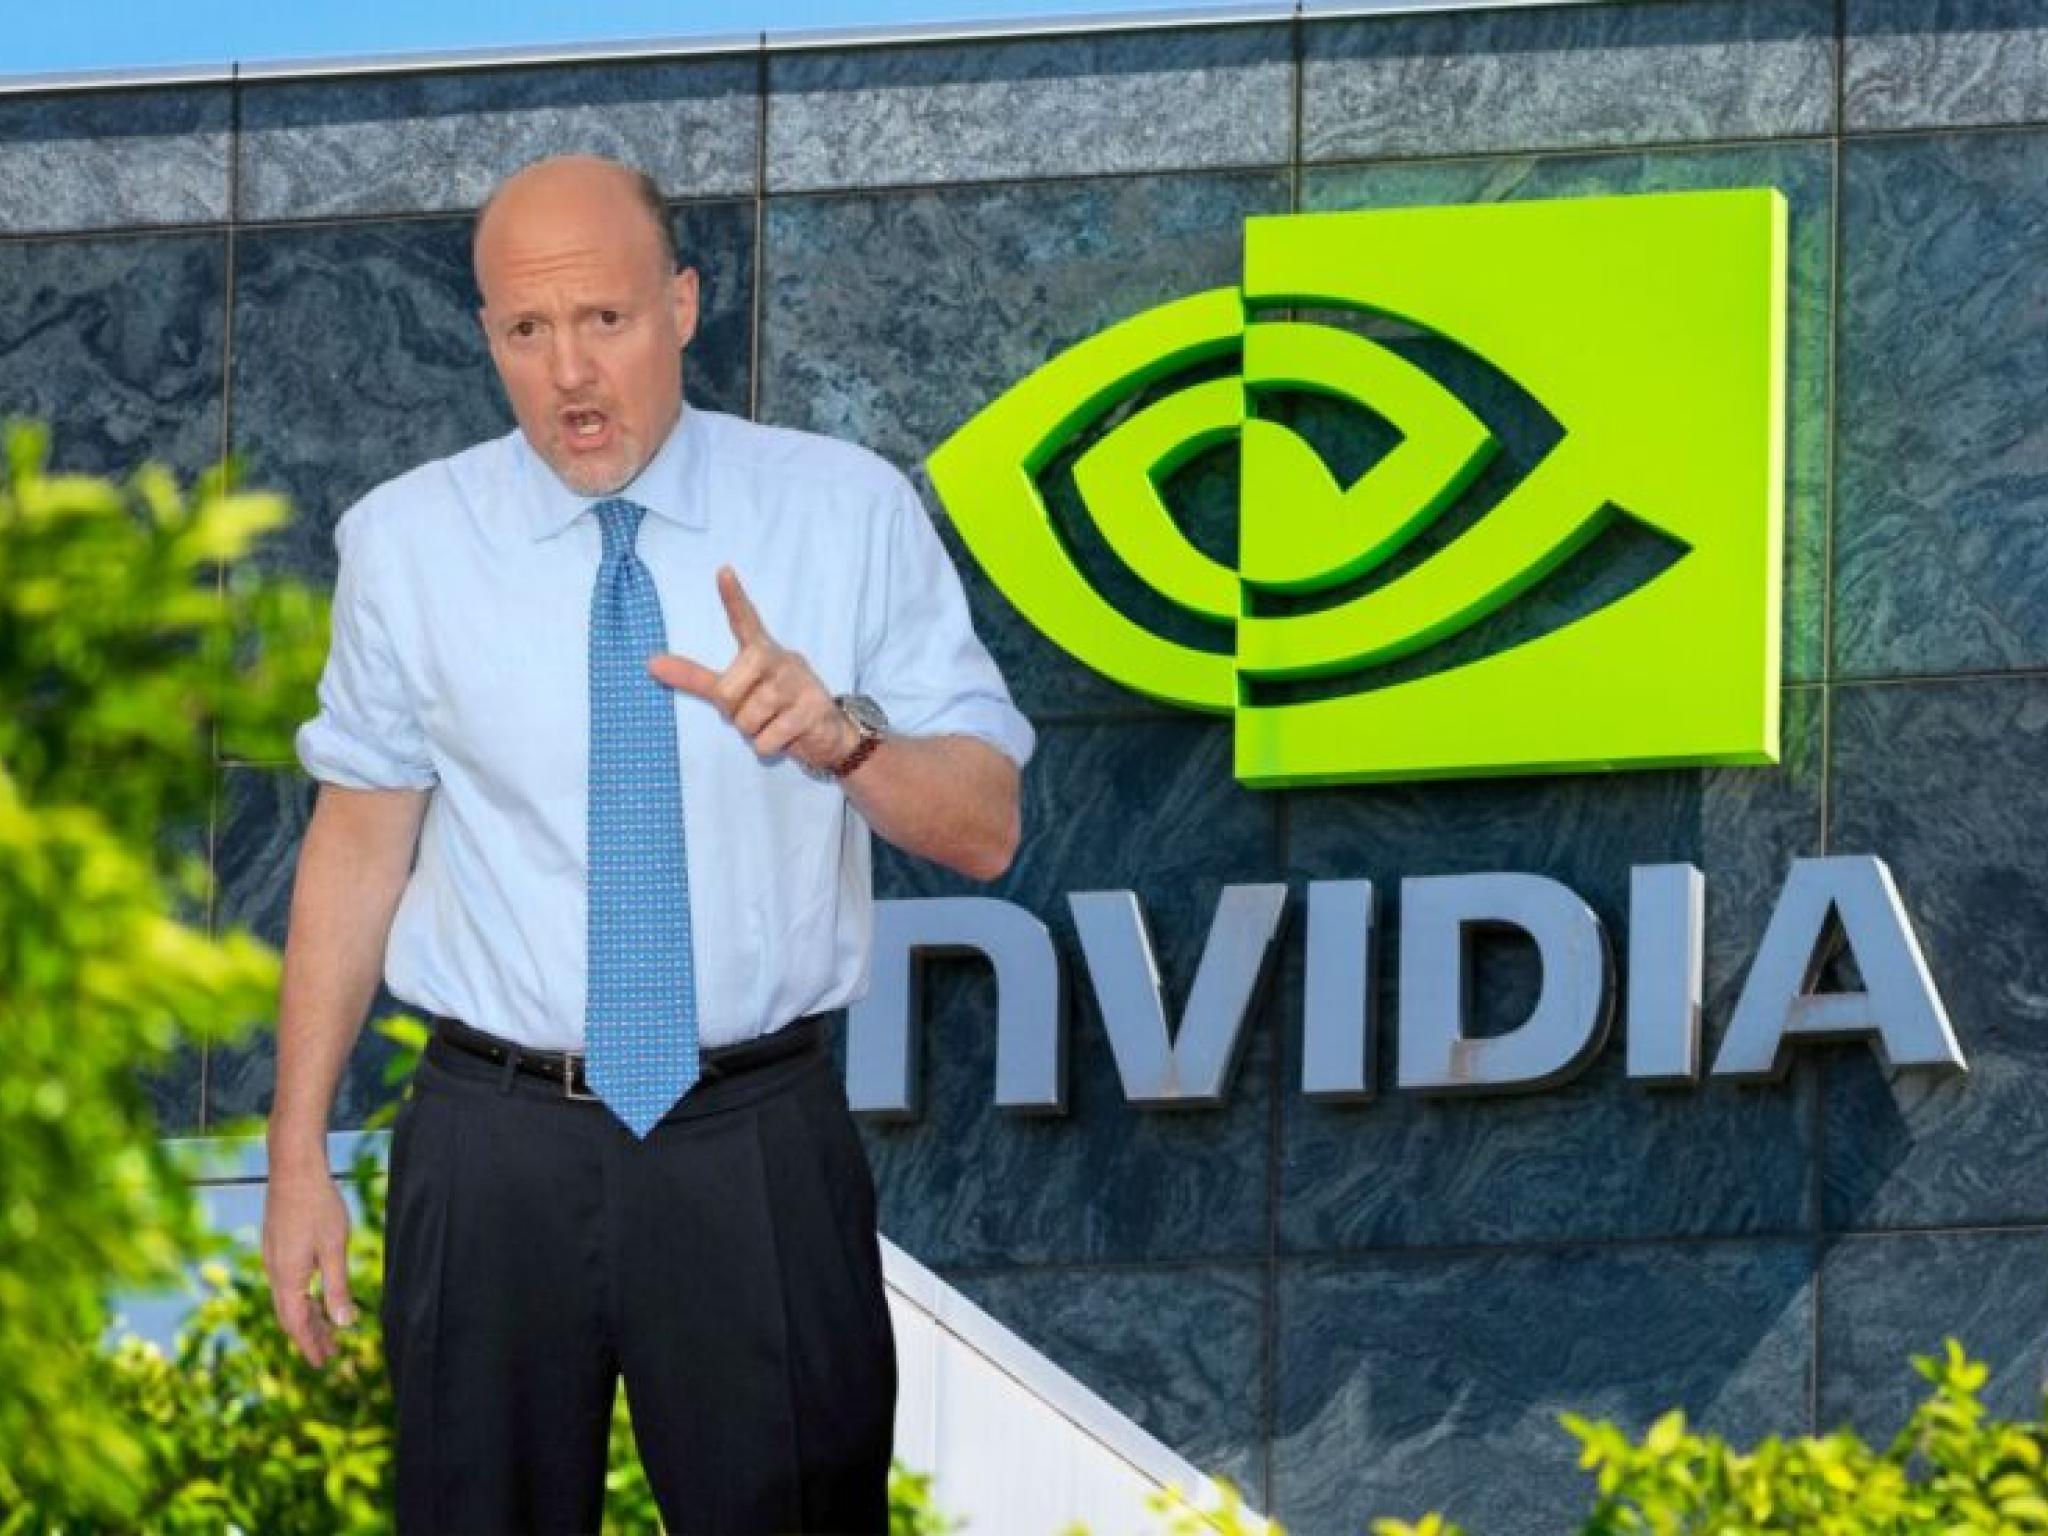  as-apple-nvidia-trade-near-all-time-highs-jim-cramer-tells-investors-to-cash-in-on-ai-stocks-lets-not-be-too-greedy 